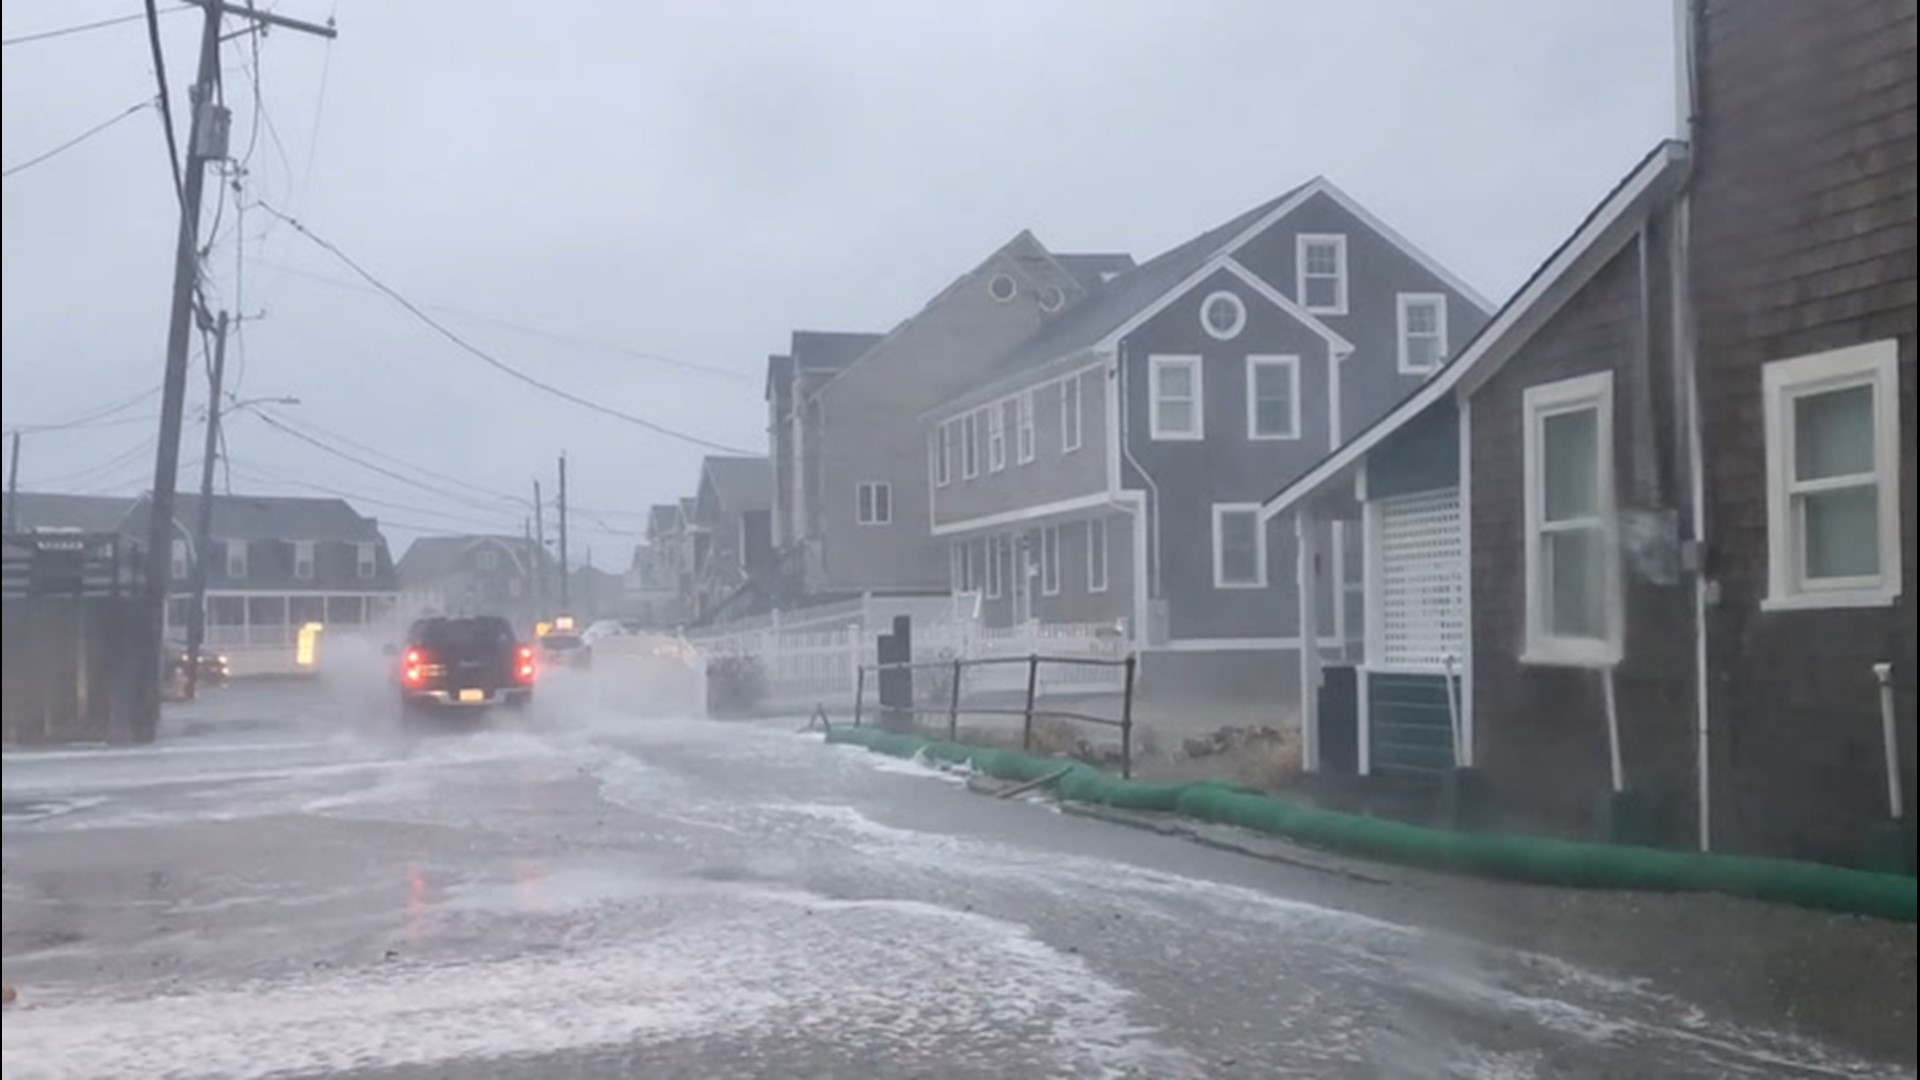 A powerful storm blew rain throughout the town of Scituate, Massachusetts, on Dec. 5, causing minor flooding throughout the town.